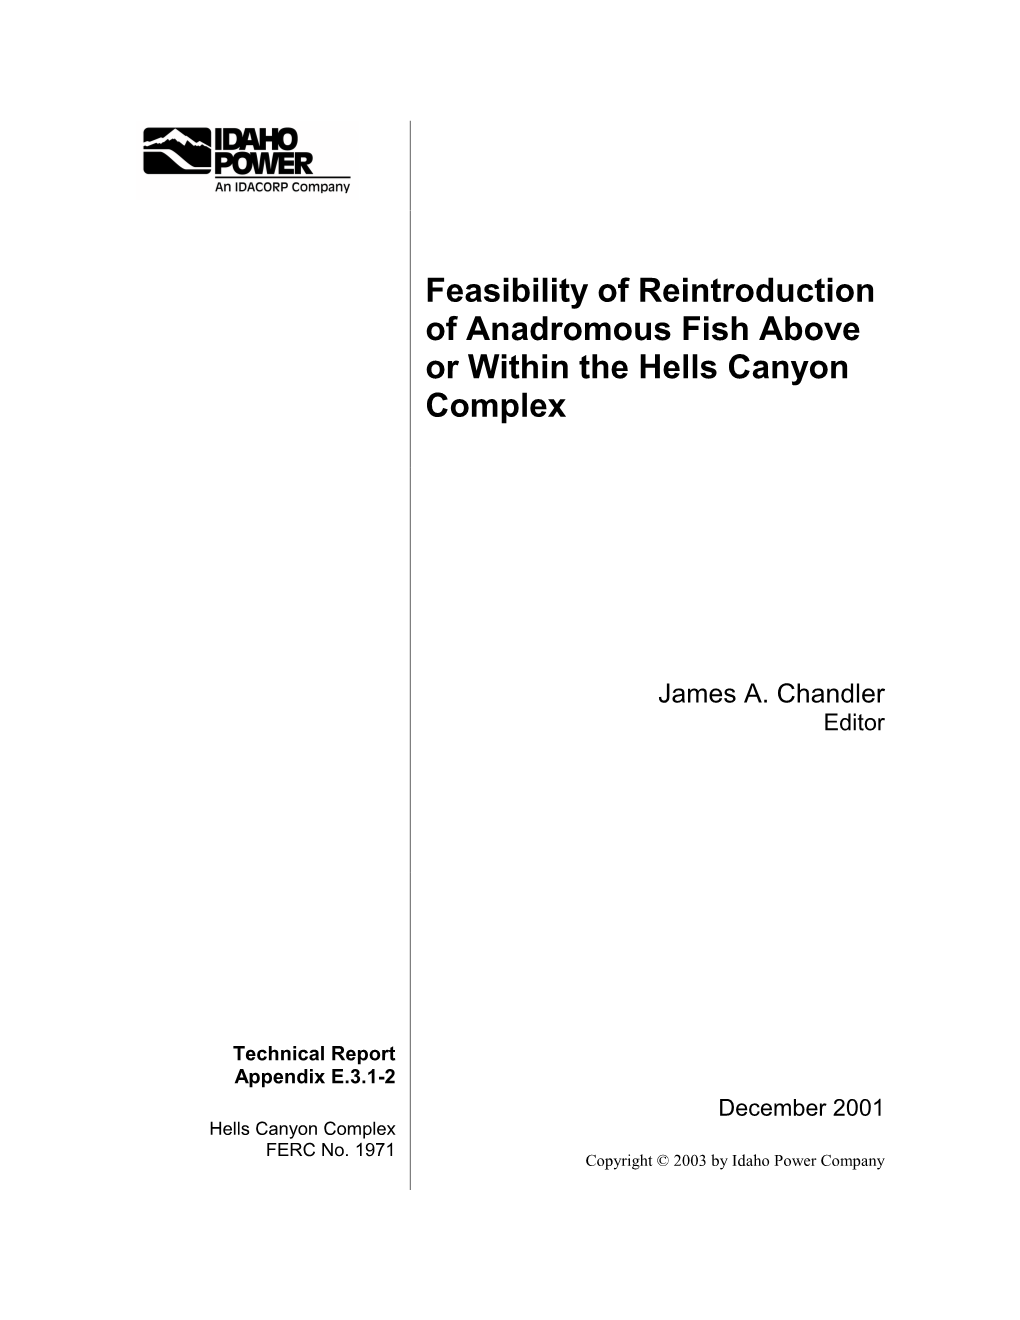 (Chapter 11) Evaluation of Reintroduction